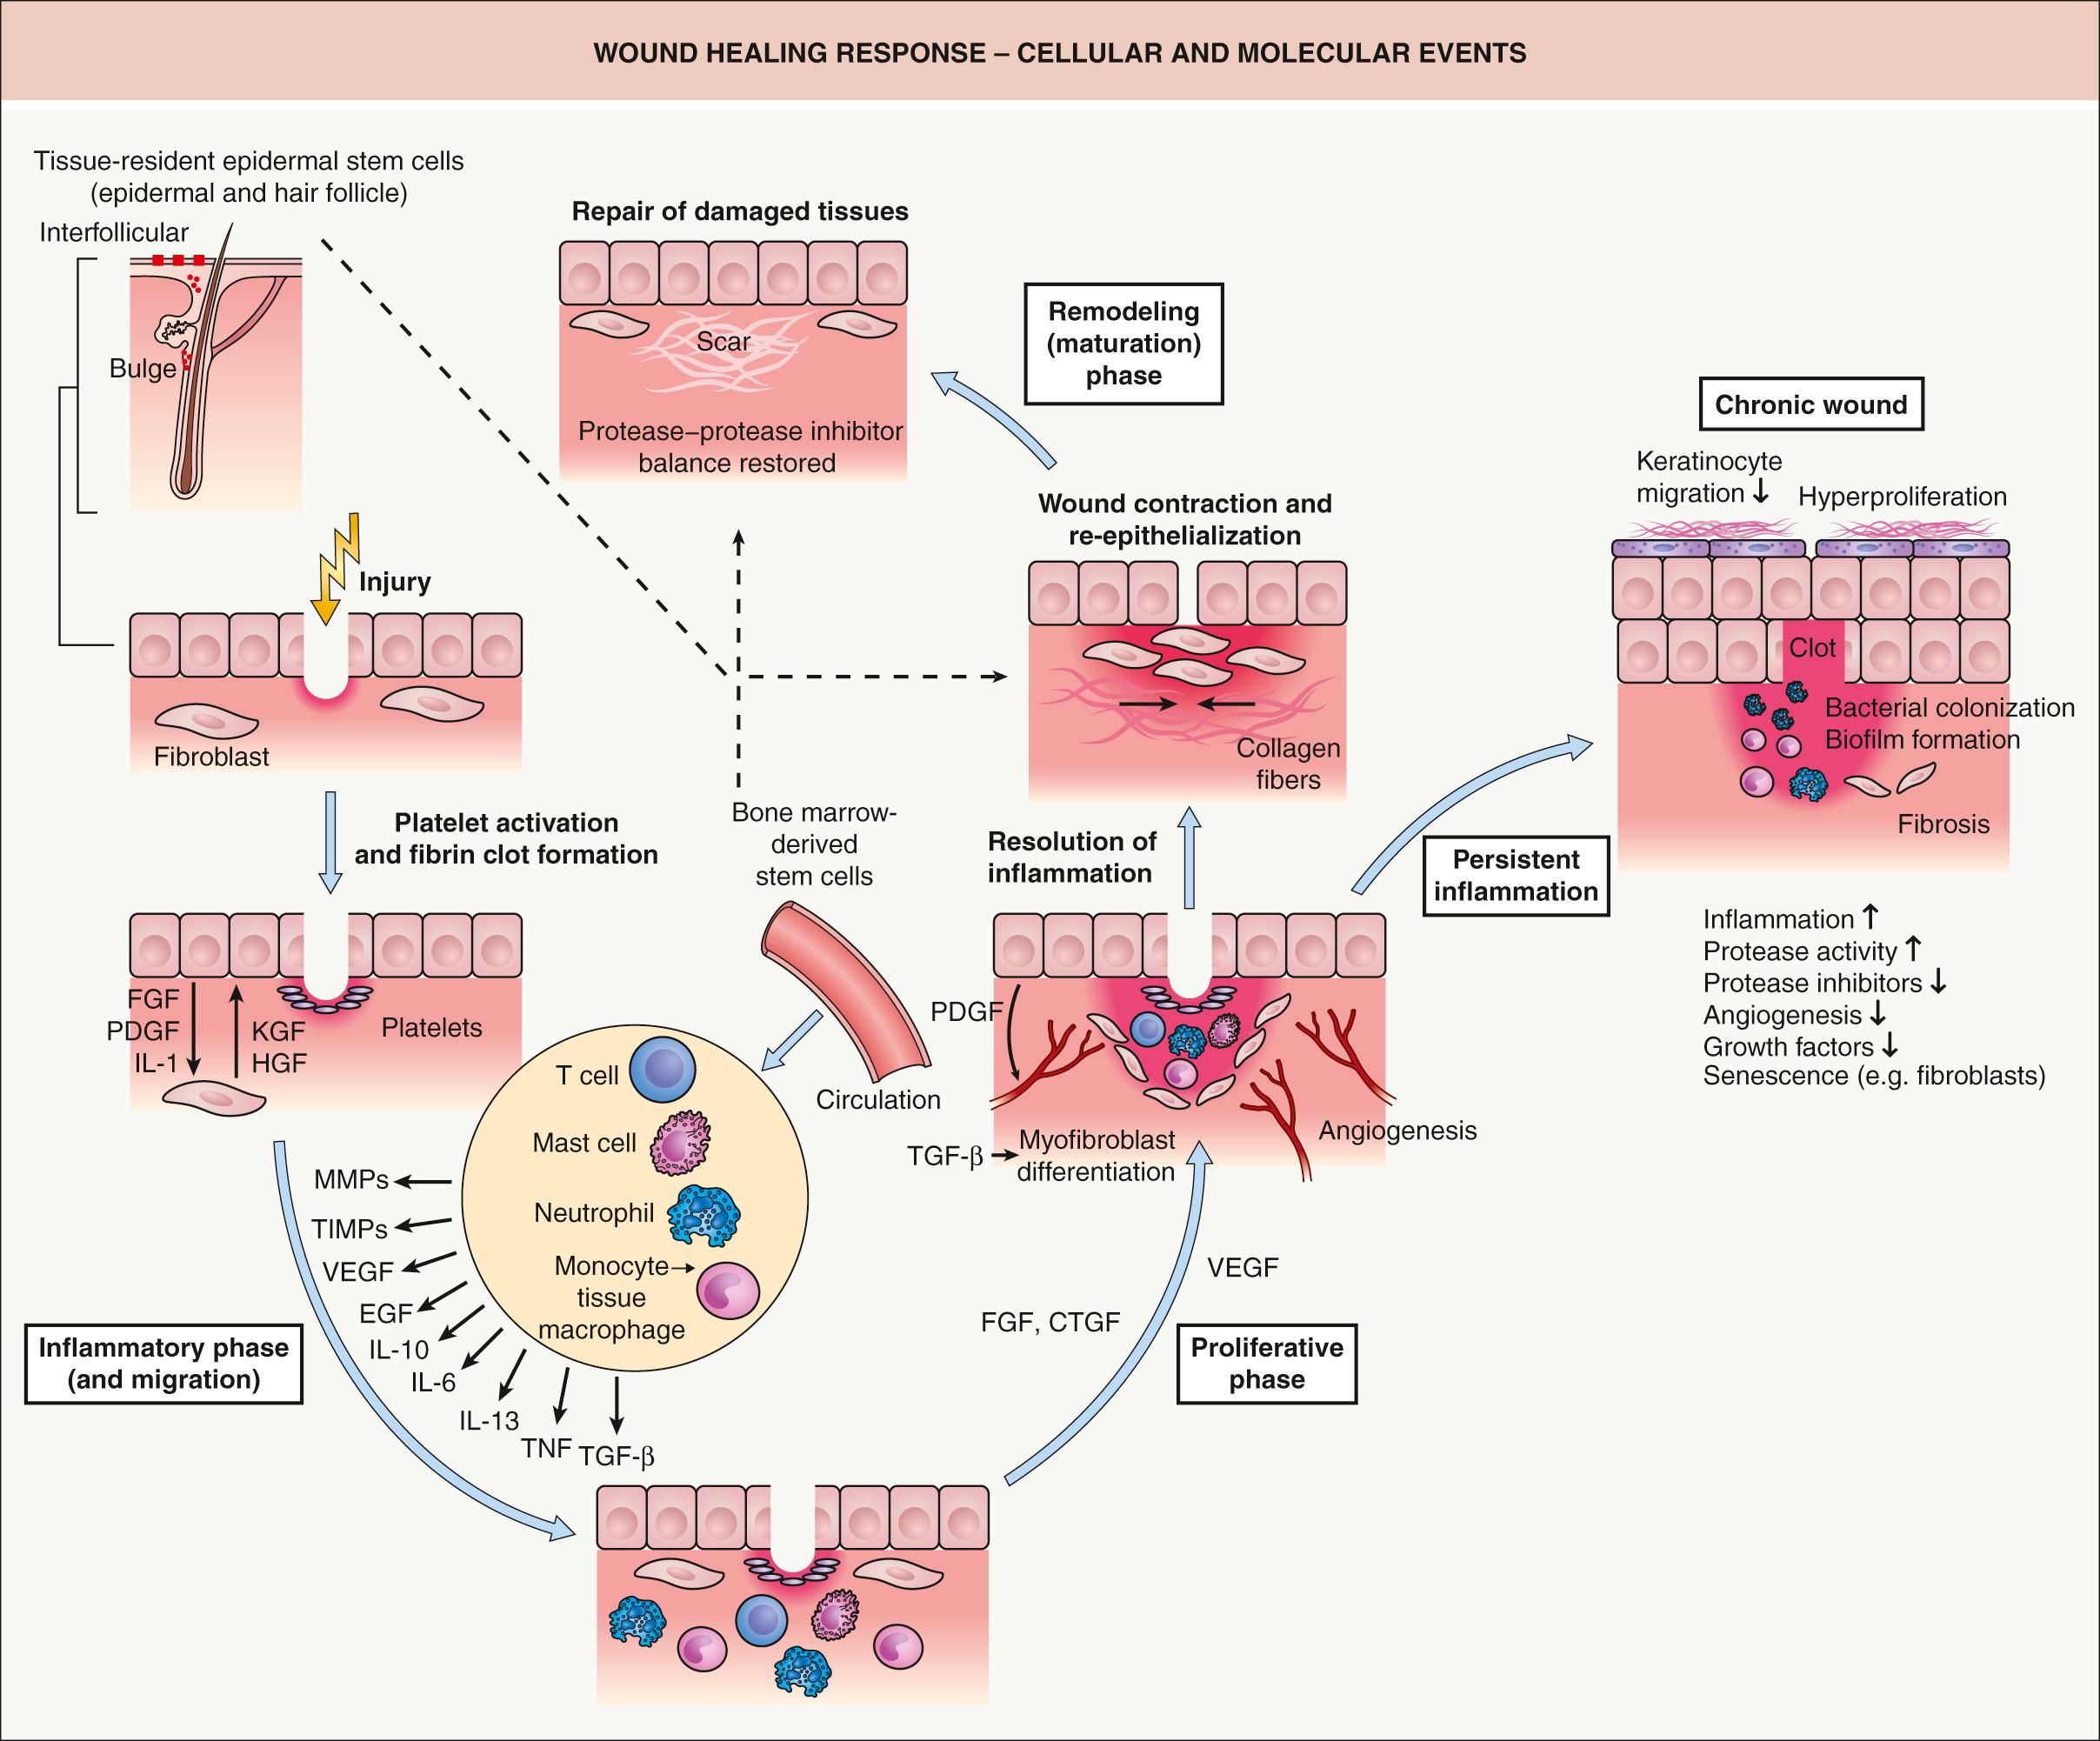 Fig. 141.3, Wound healing response – cellular and molecular events.